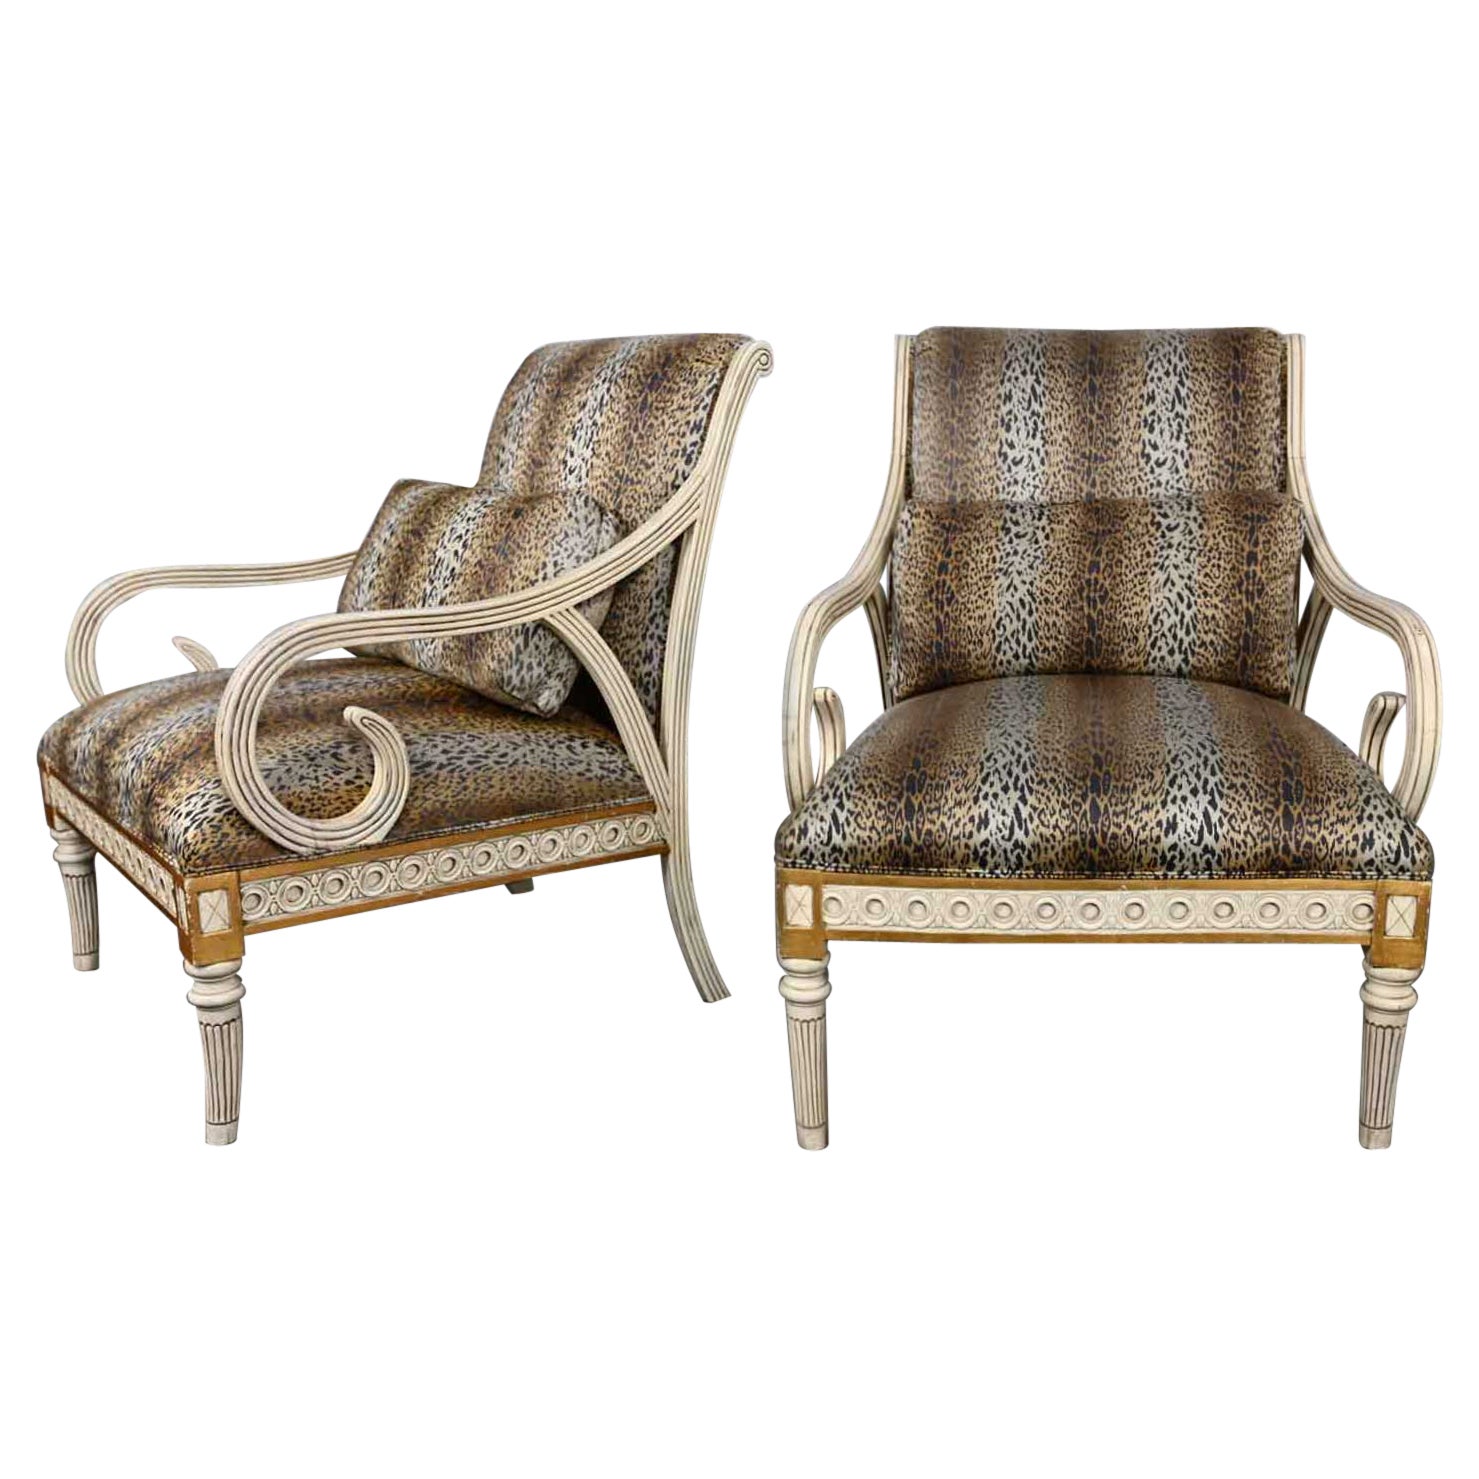 Late 20th Henredon Neoclassic Revival Animal Print Large Scale Arm Chairs a Pair For Sale